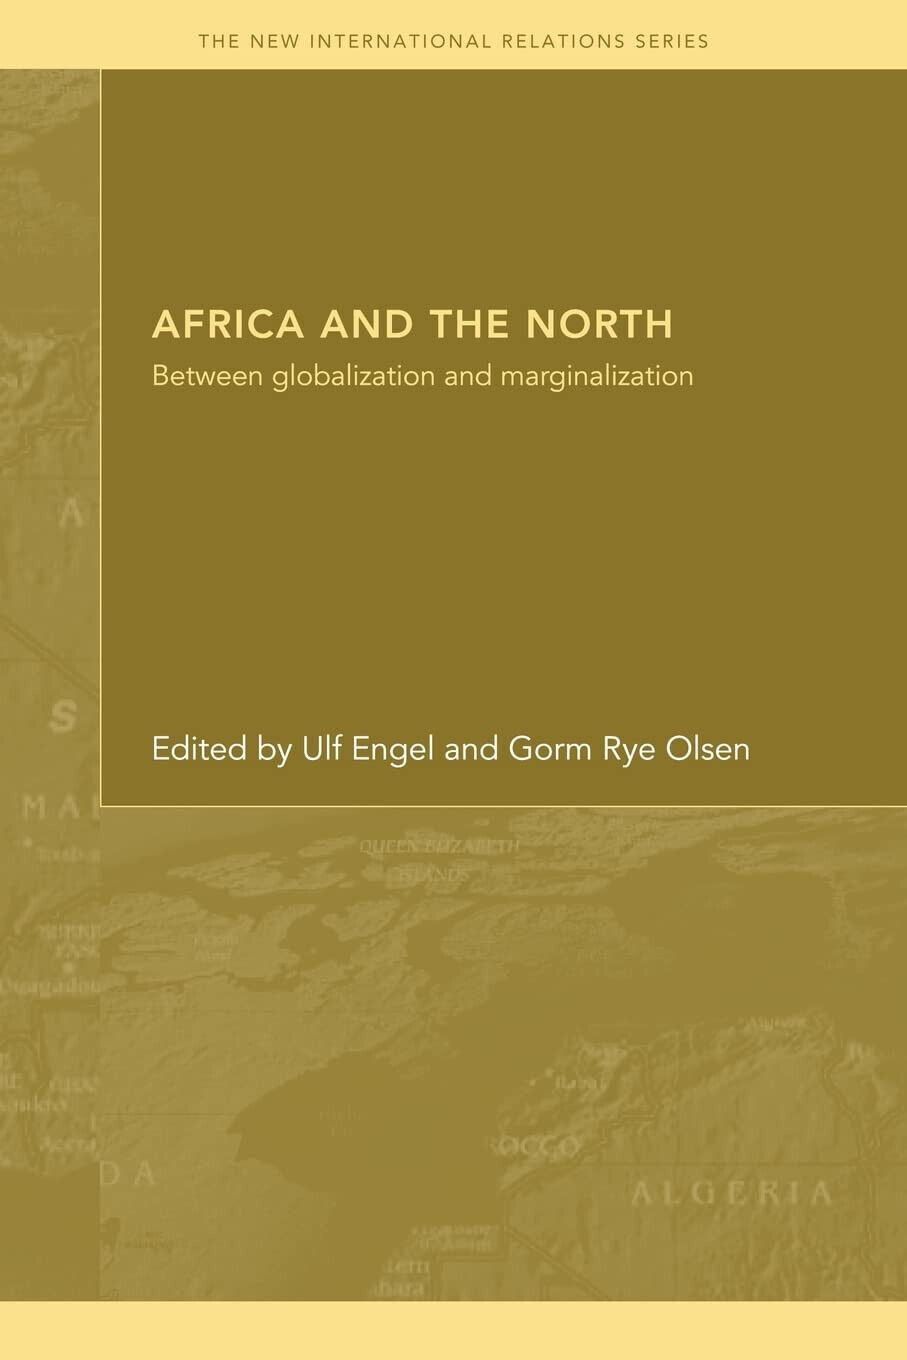 Africa and the North - Ulf Engel - Taylor & Francis, 2009